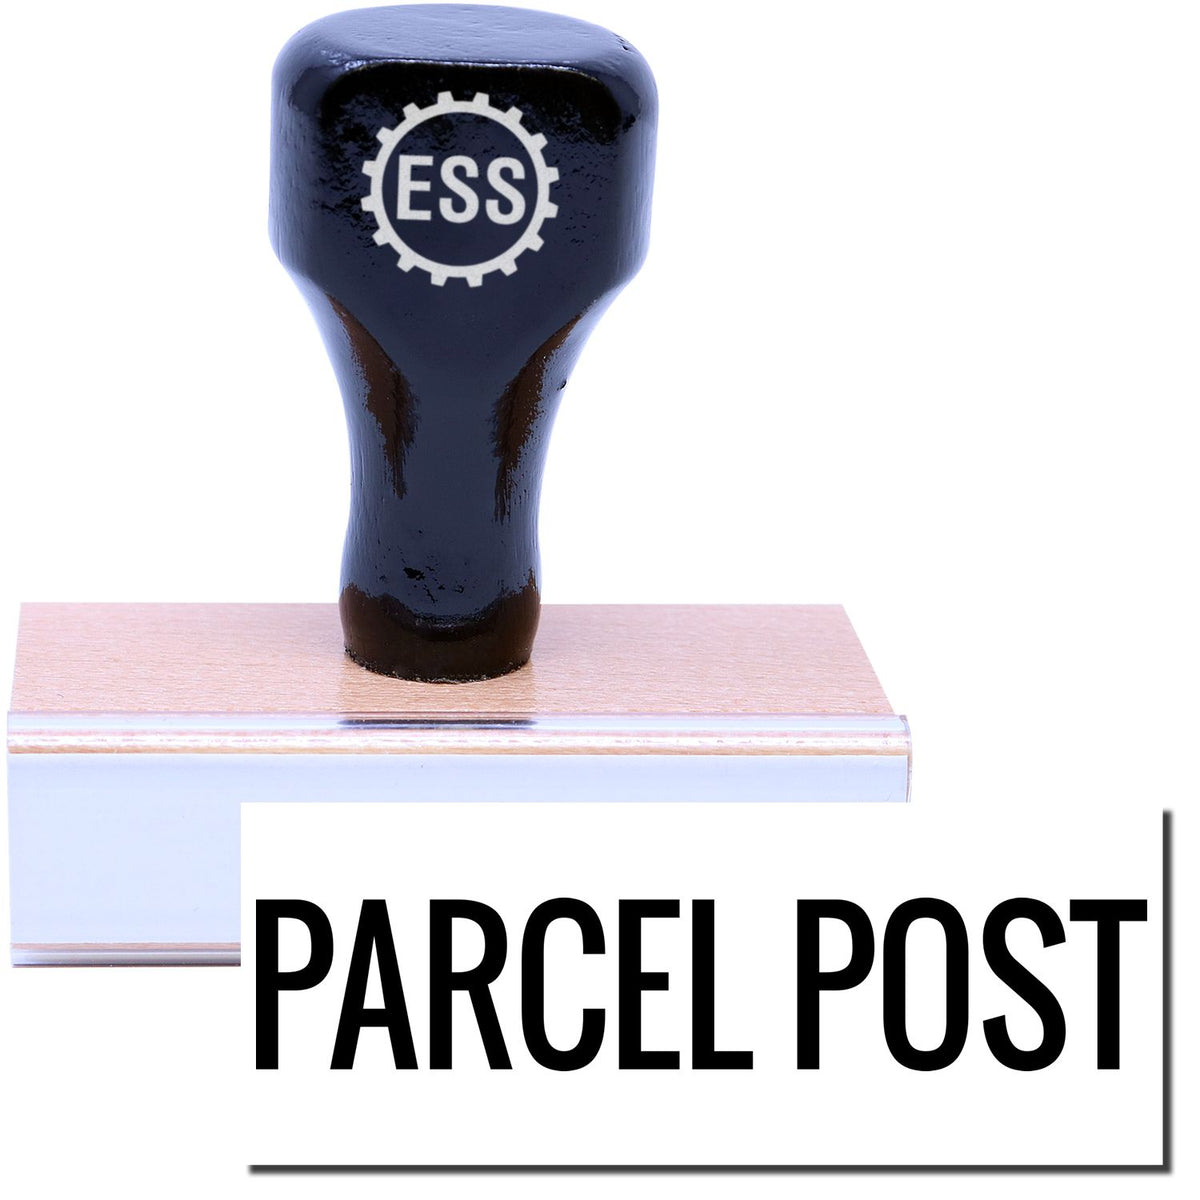 A stock office rubber stamp with a stamped image showing how the text &quot;PARCEL POST&quot; in a large font is displayed after stamping.